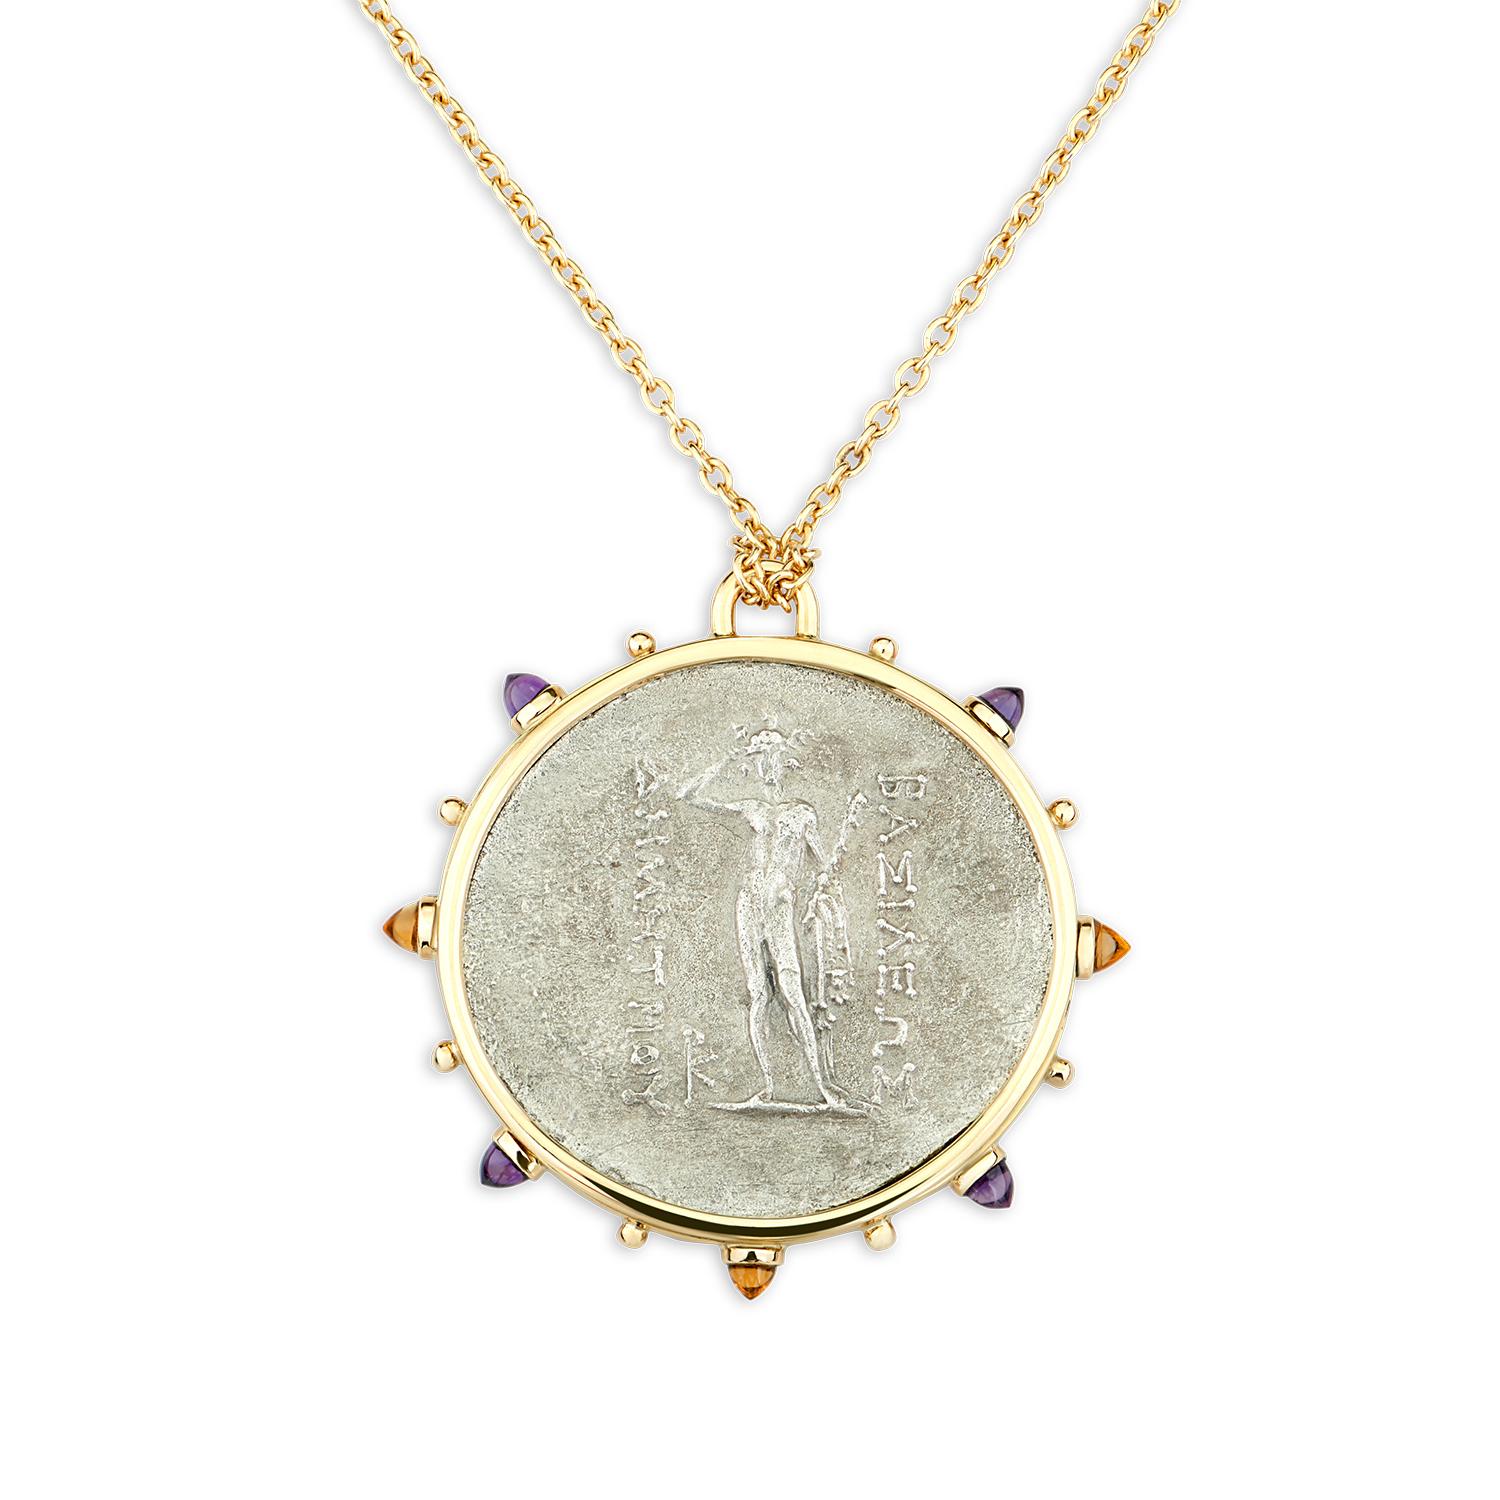 This DUBINI coin necklace from the 'Empires' collection features an authentic silver coin of Demetrios I minted circa 200-185 B.C. set in 18K yellow gold with bullet amethyst and citrine cabochons.

Depicted on the coin: Demetrios I, wearing